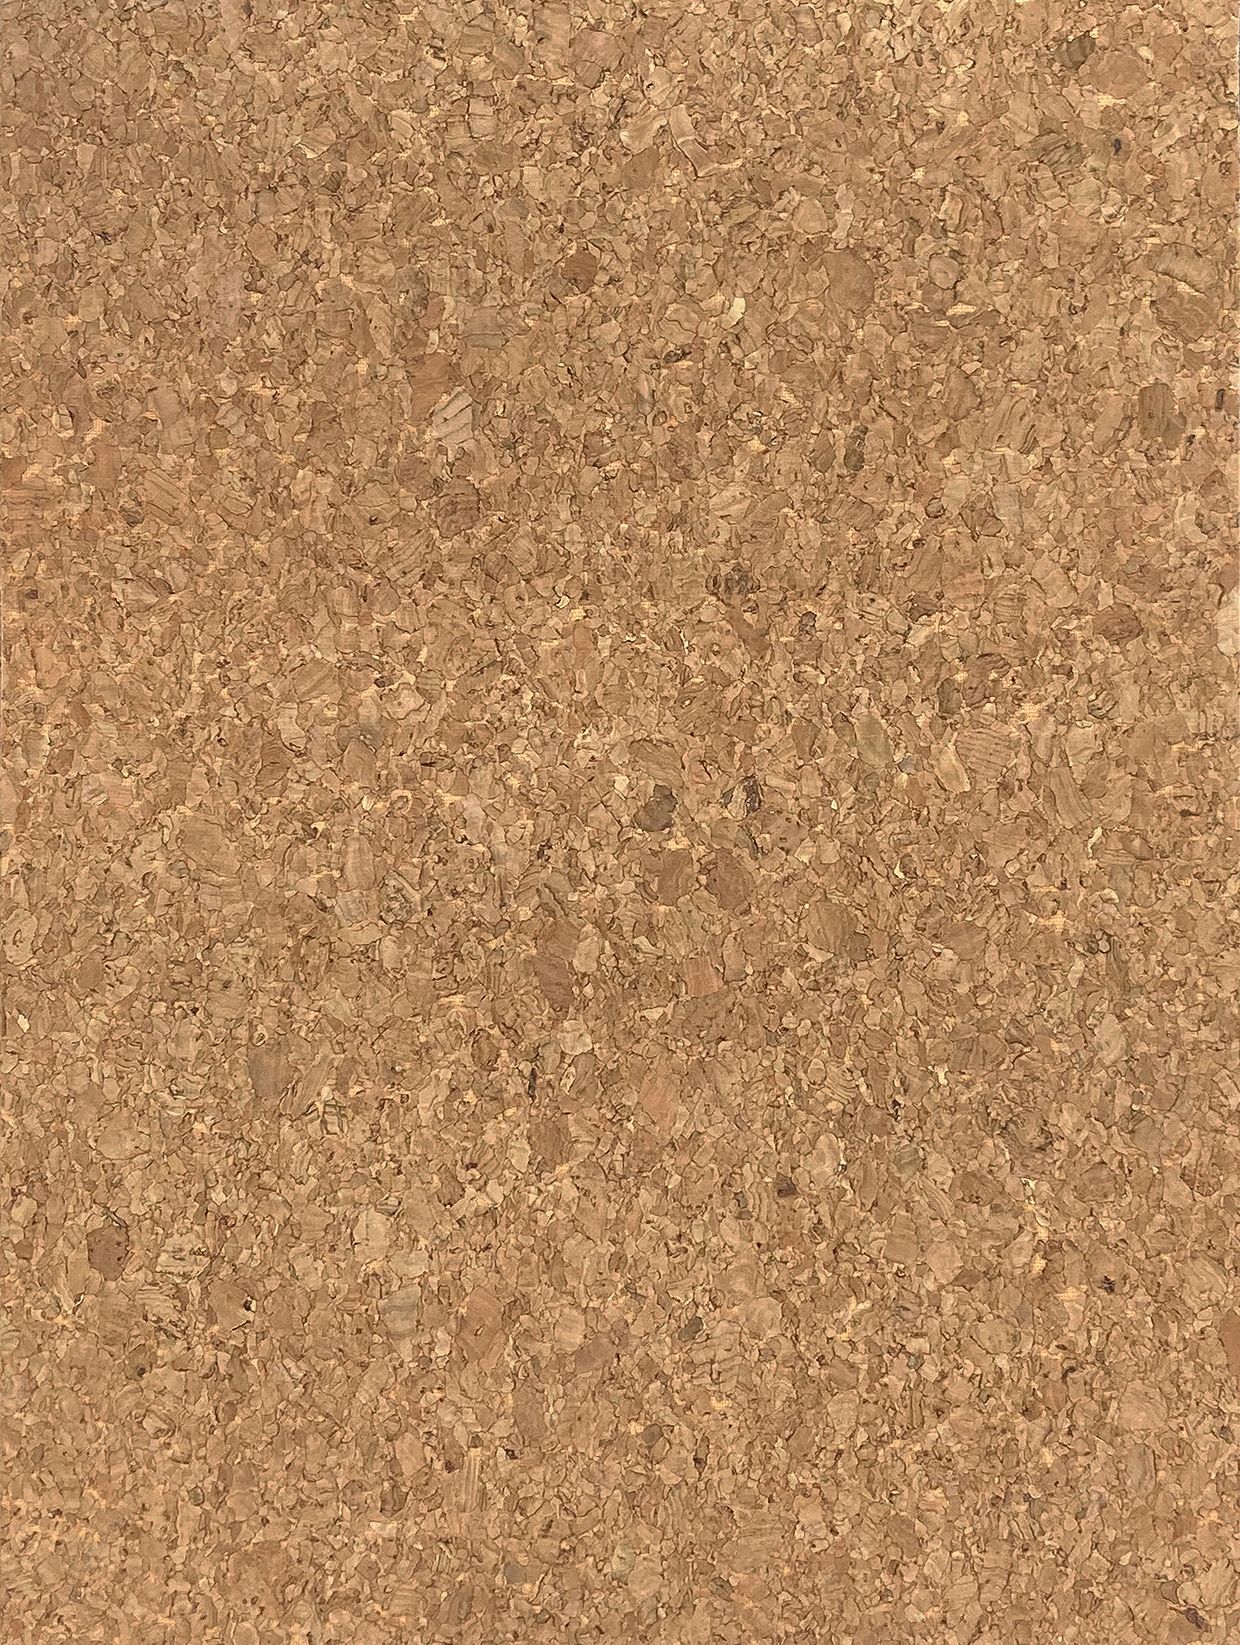 Cover Styl' WI02 Large-grain cork